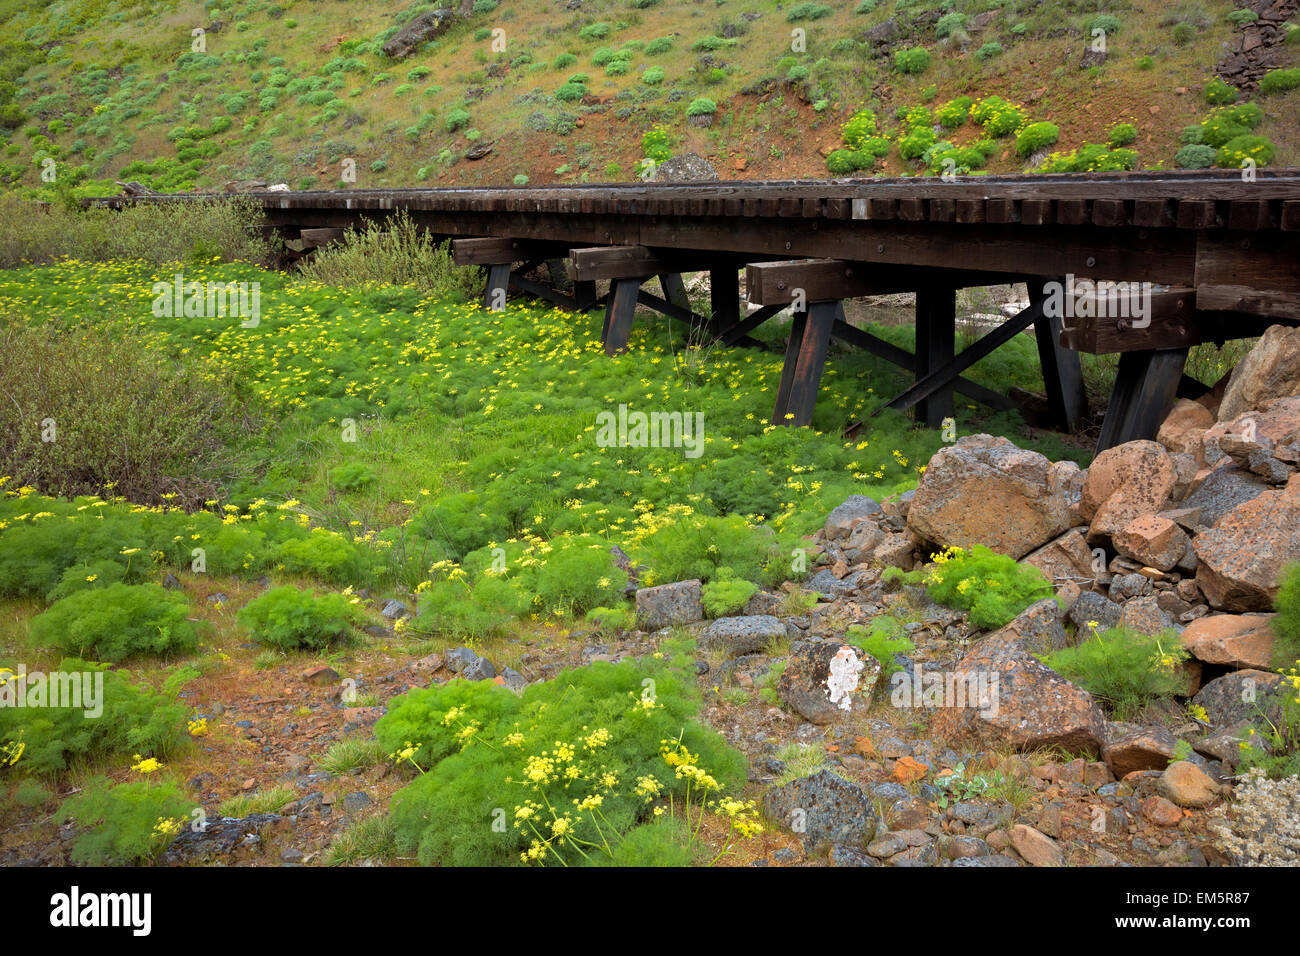 WASHINGTON - A railroad type trestle over a dry, desert parsley covered creek bed in Swale Canyon along the Klickitat Trail. Stock Photo